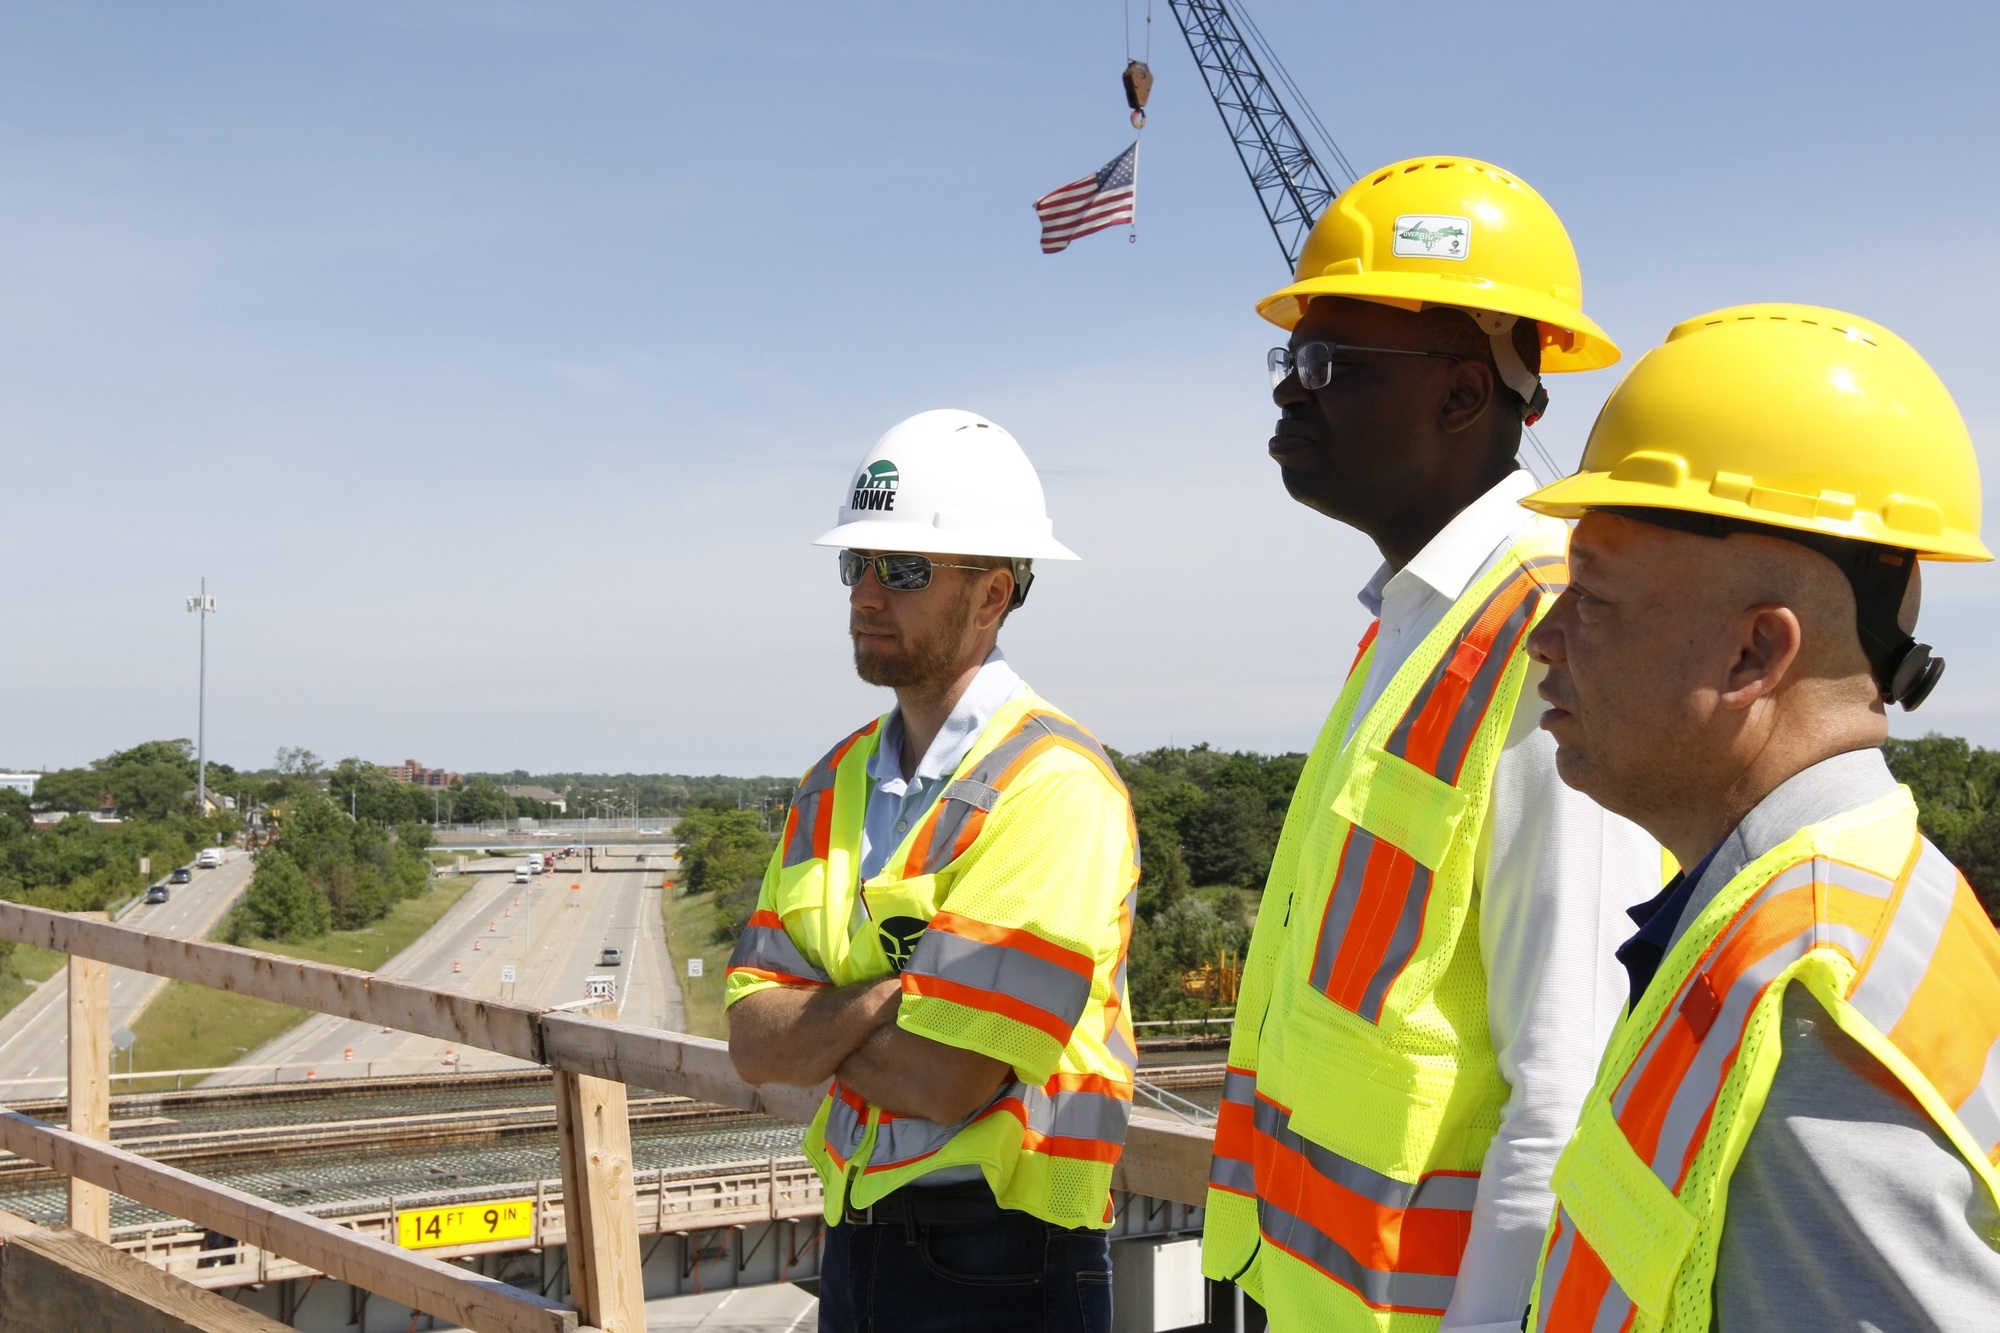  Lt. Governor Gilchrist Tours Rebuilding Michigan Project in Flint 